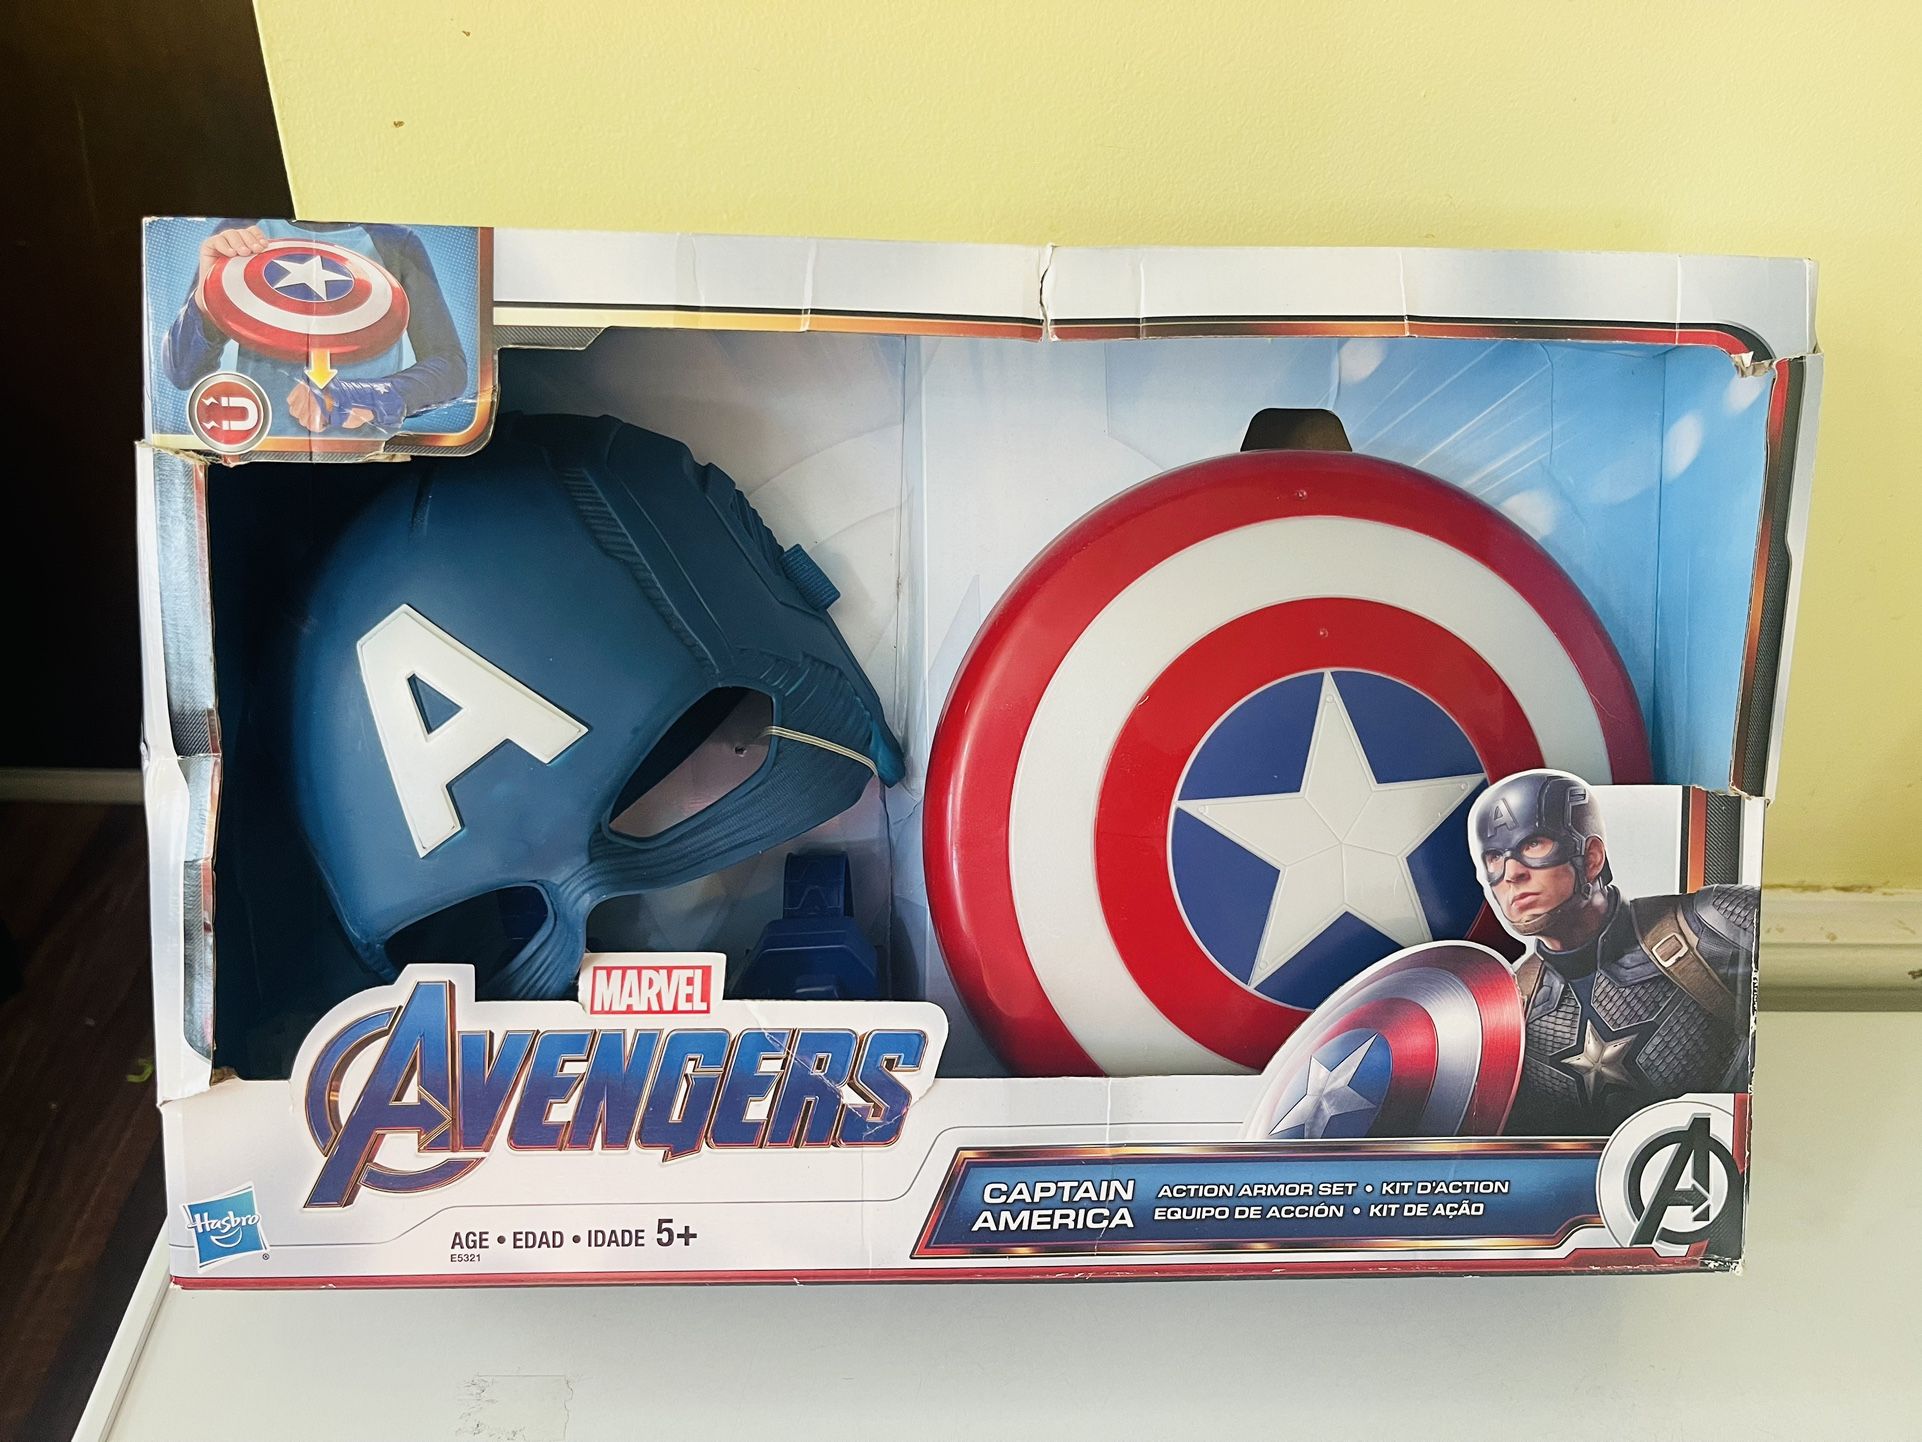 Marvel Avengers: Captain America Kids Toy Action Figure Armor Set for Boys and Girls, 3 Pieces